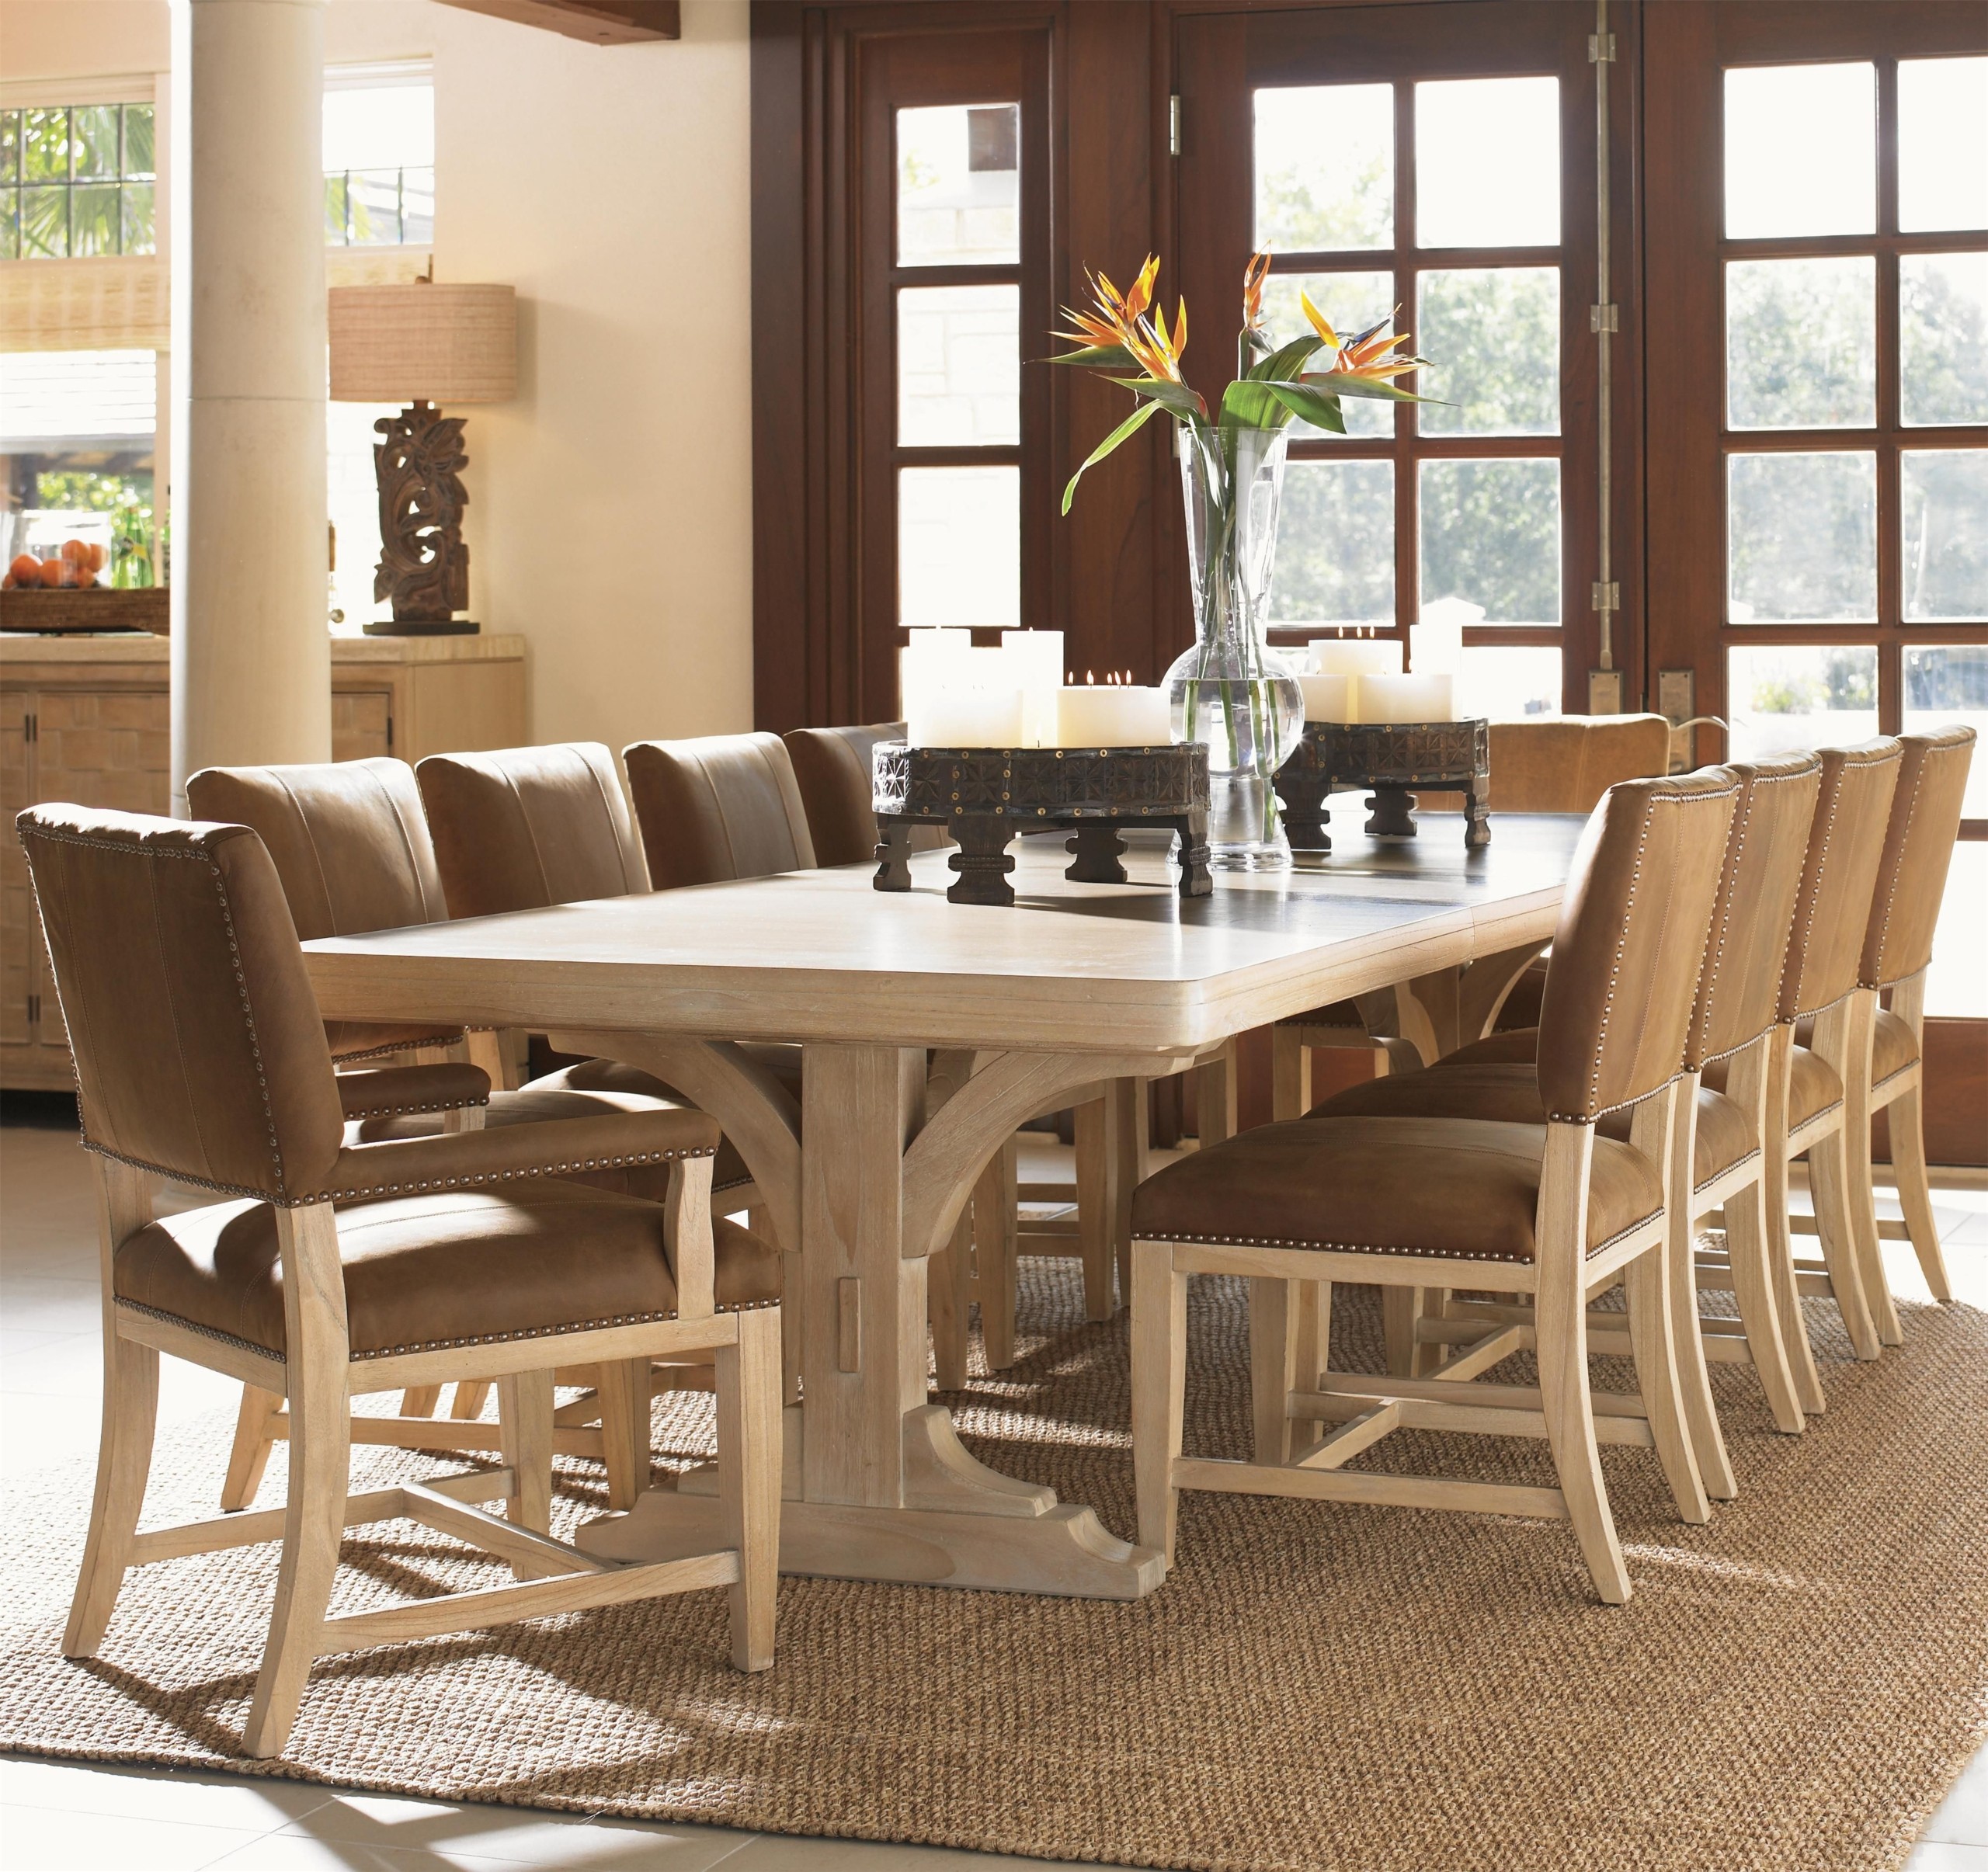 Dining chairs with arms cozy in style leather dining chairs